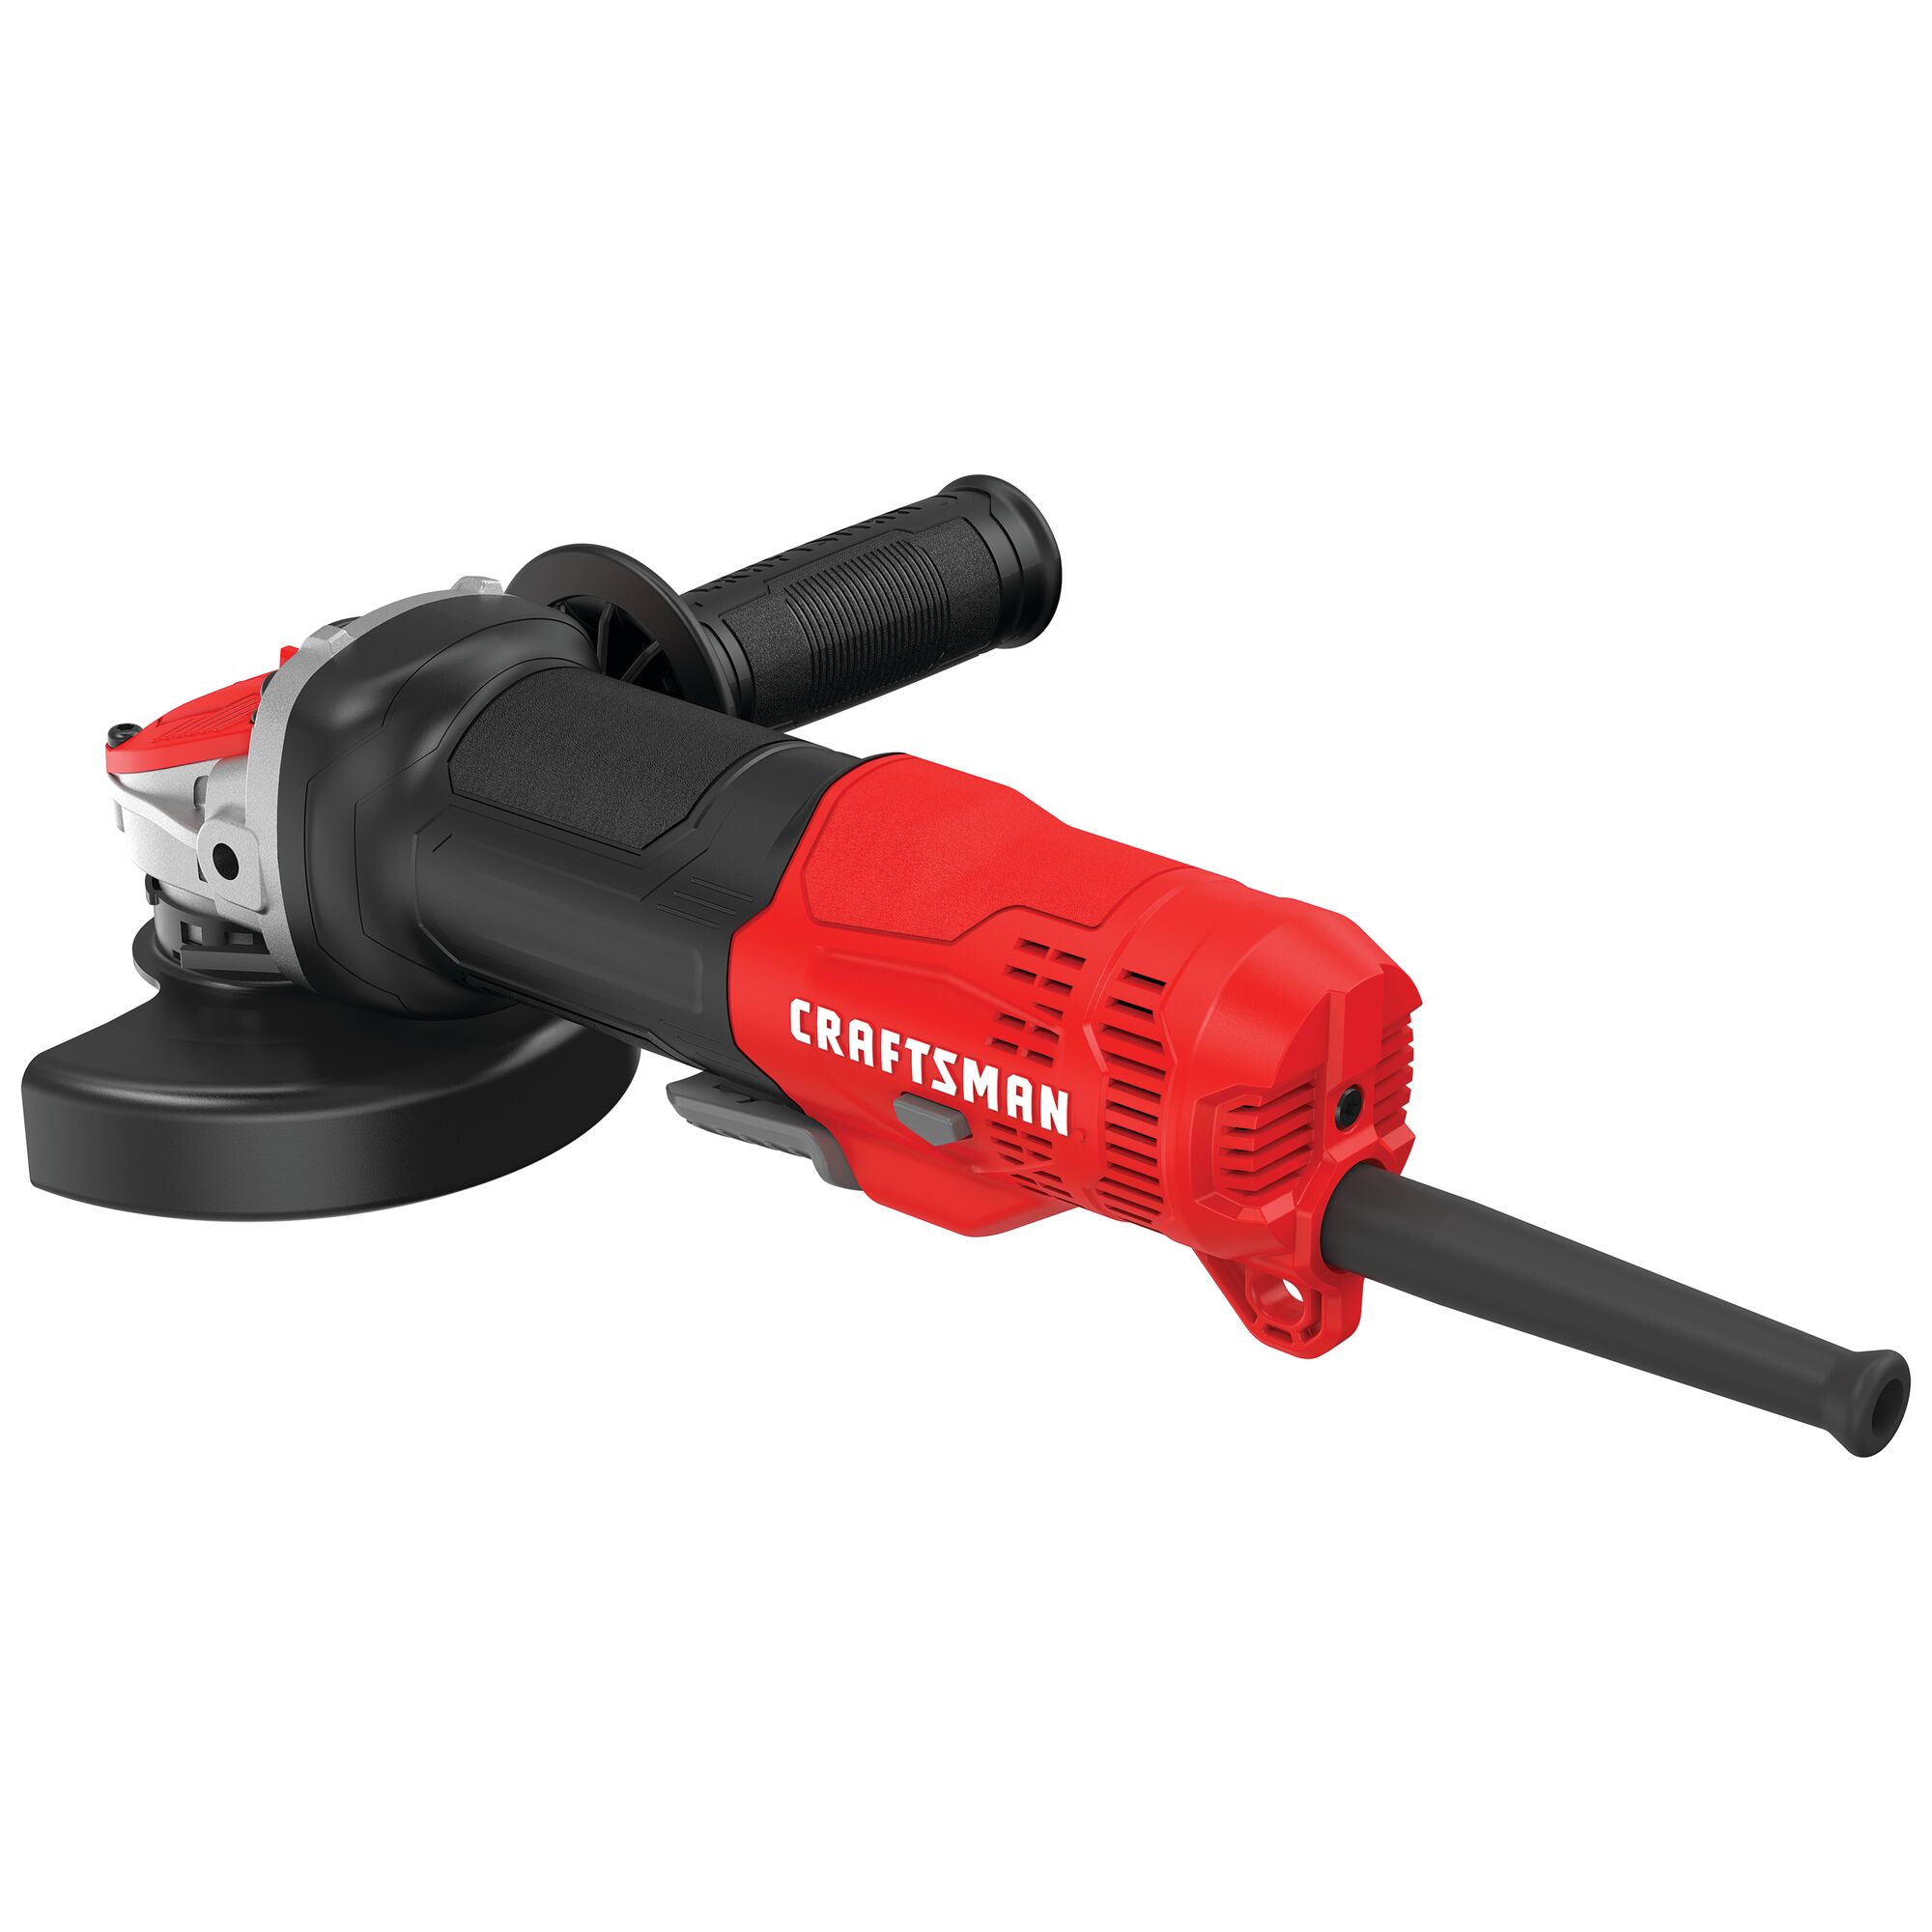 CRAFTSMAN 4.5-in 7.5 Amps Paddle Switch Corded Angle Grinder in